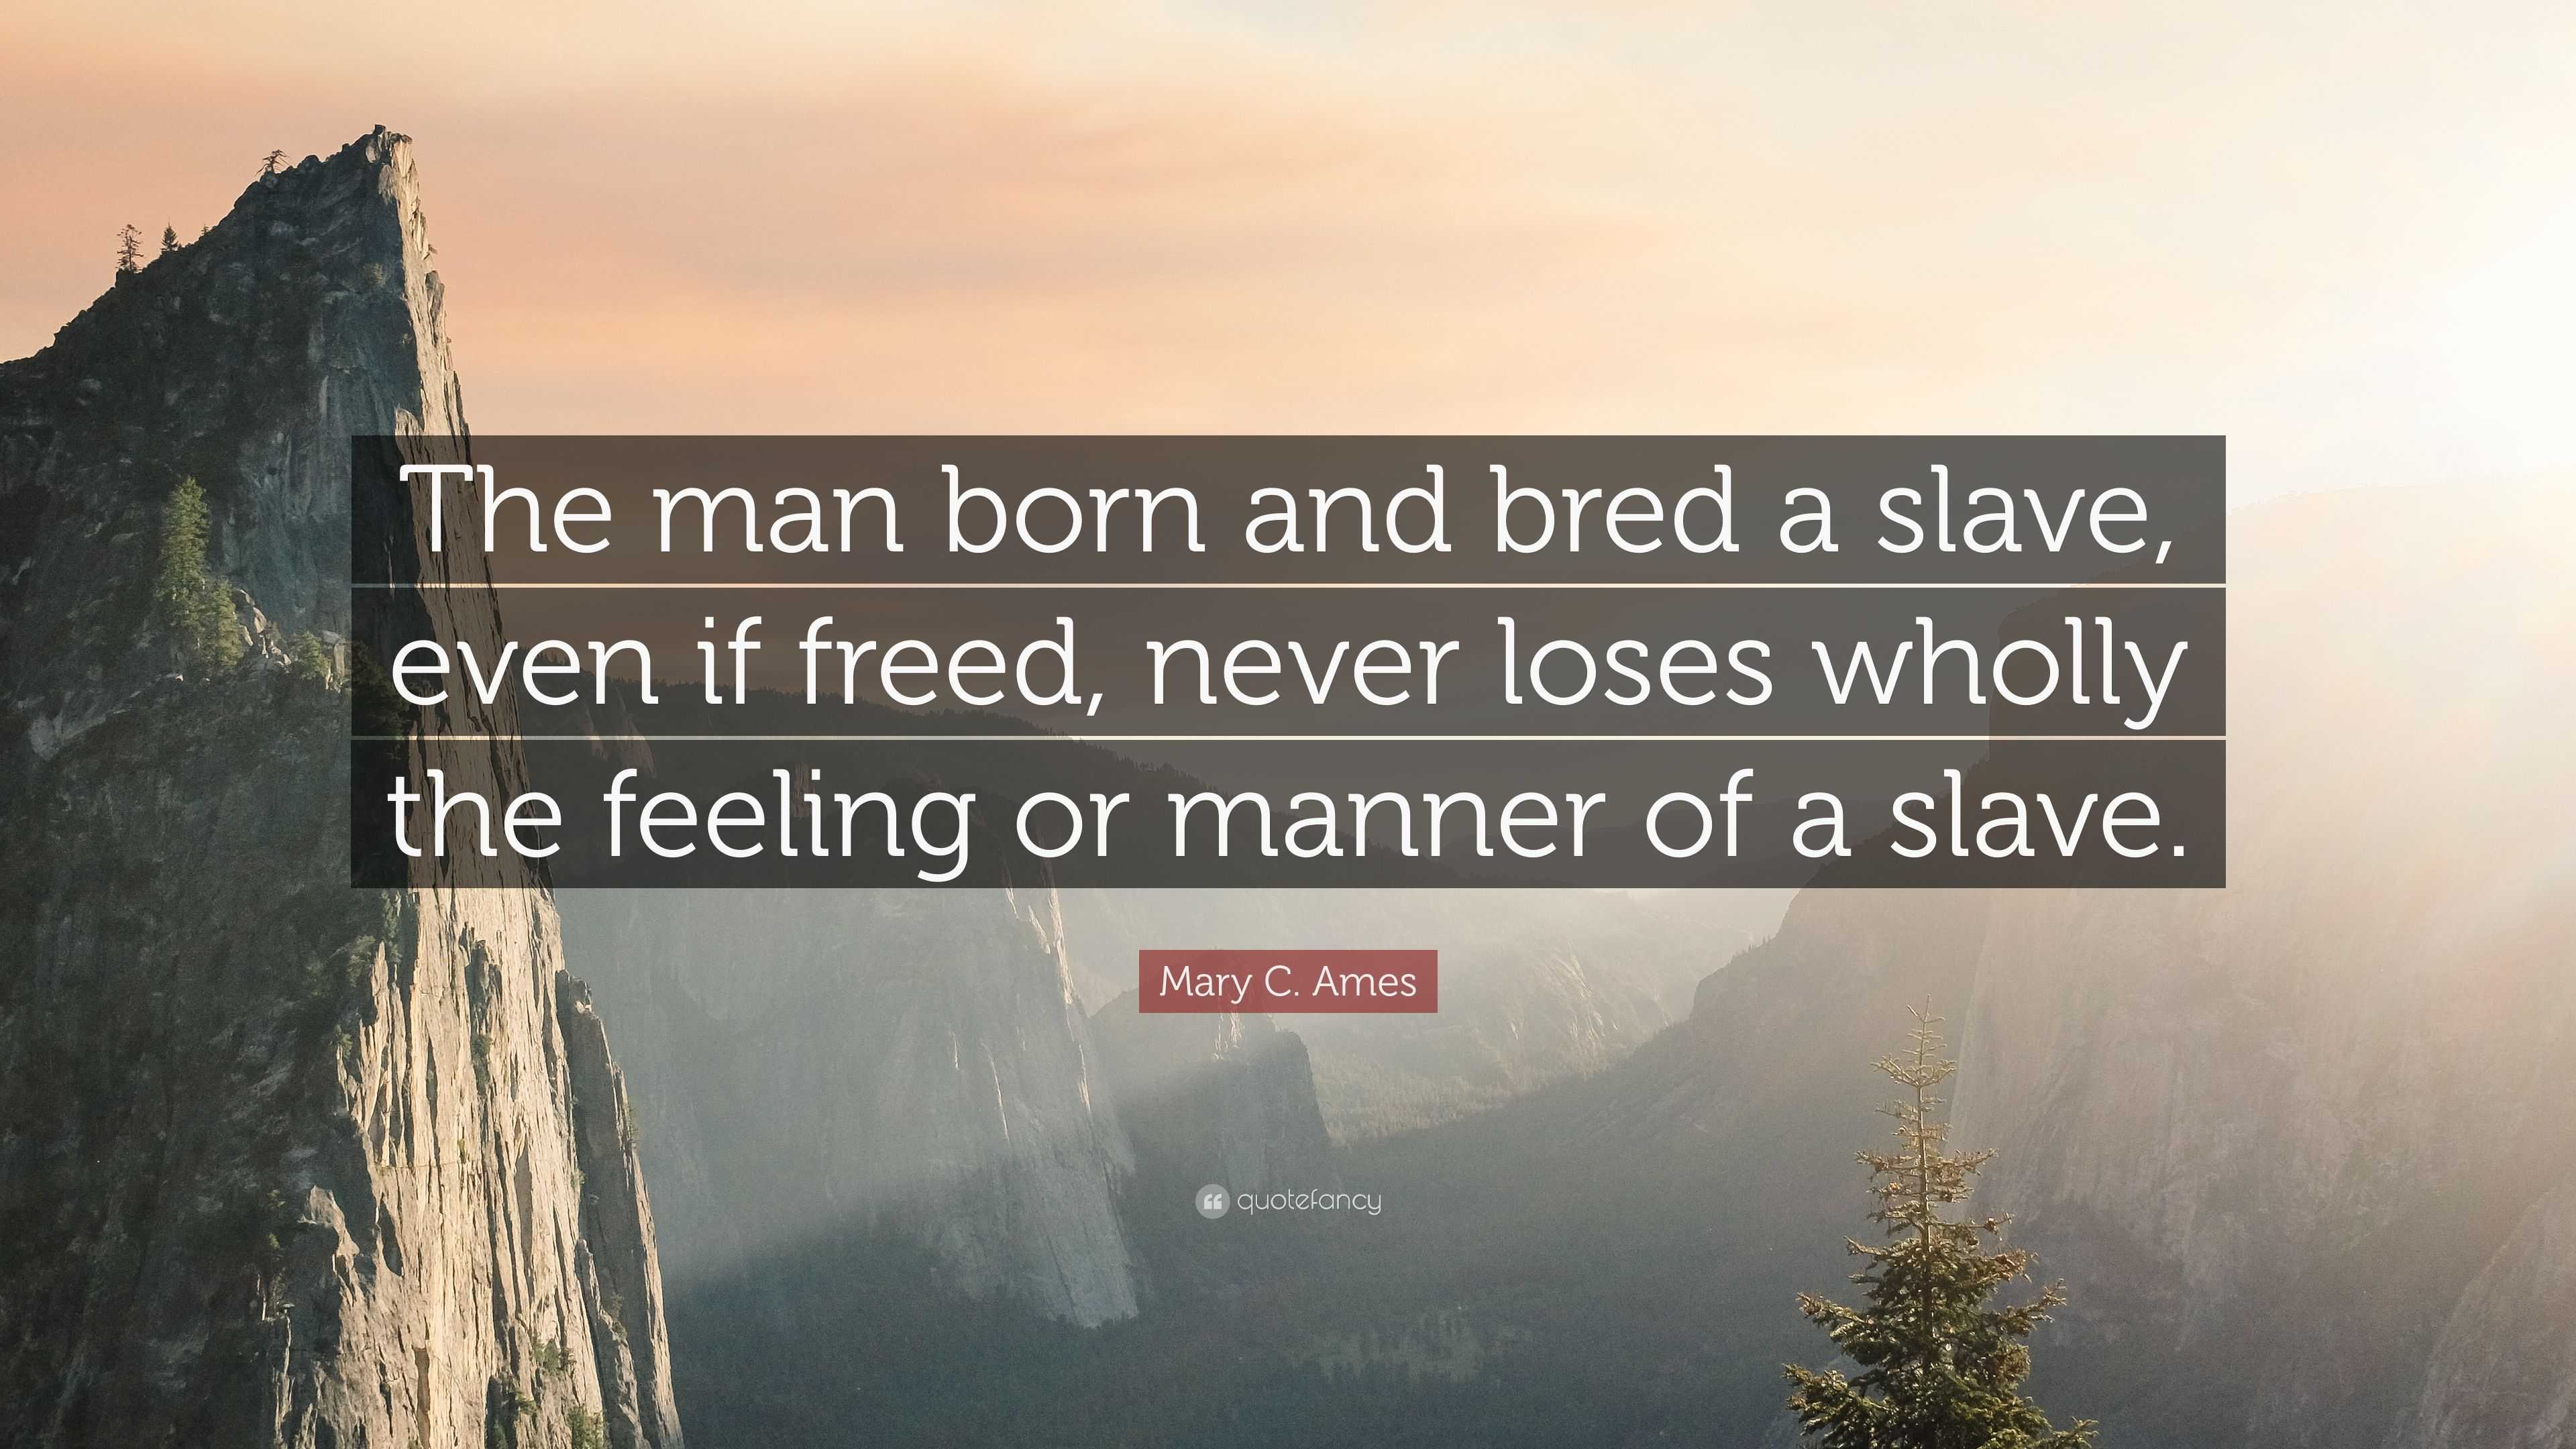 Mary C. Ames Quote: “The man born and bred a slave, even if freed ...